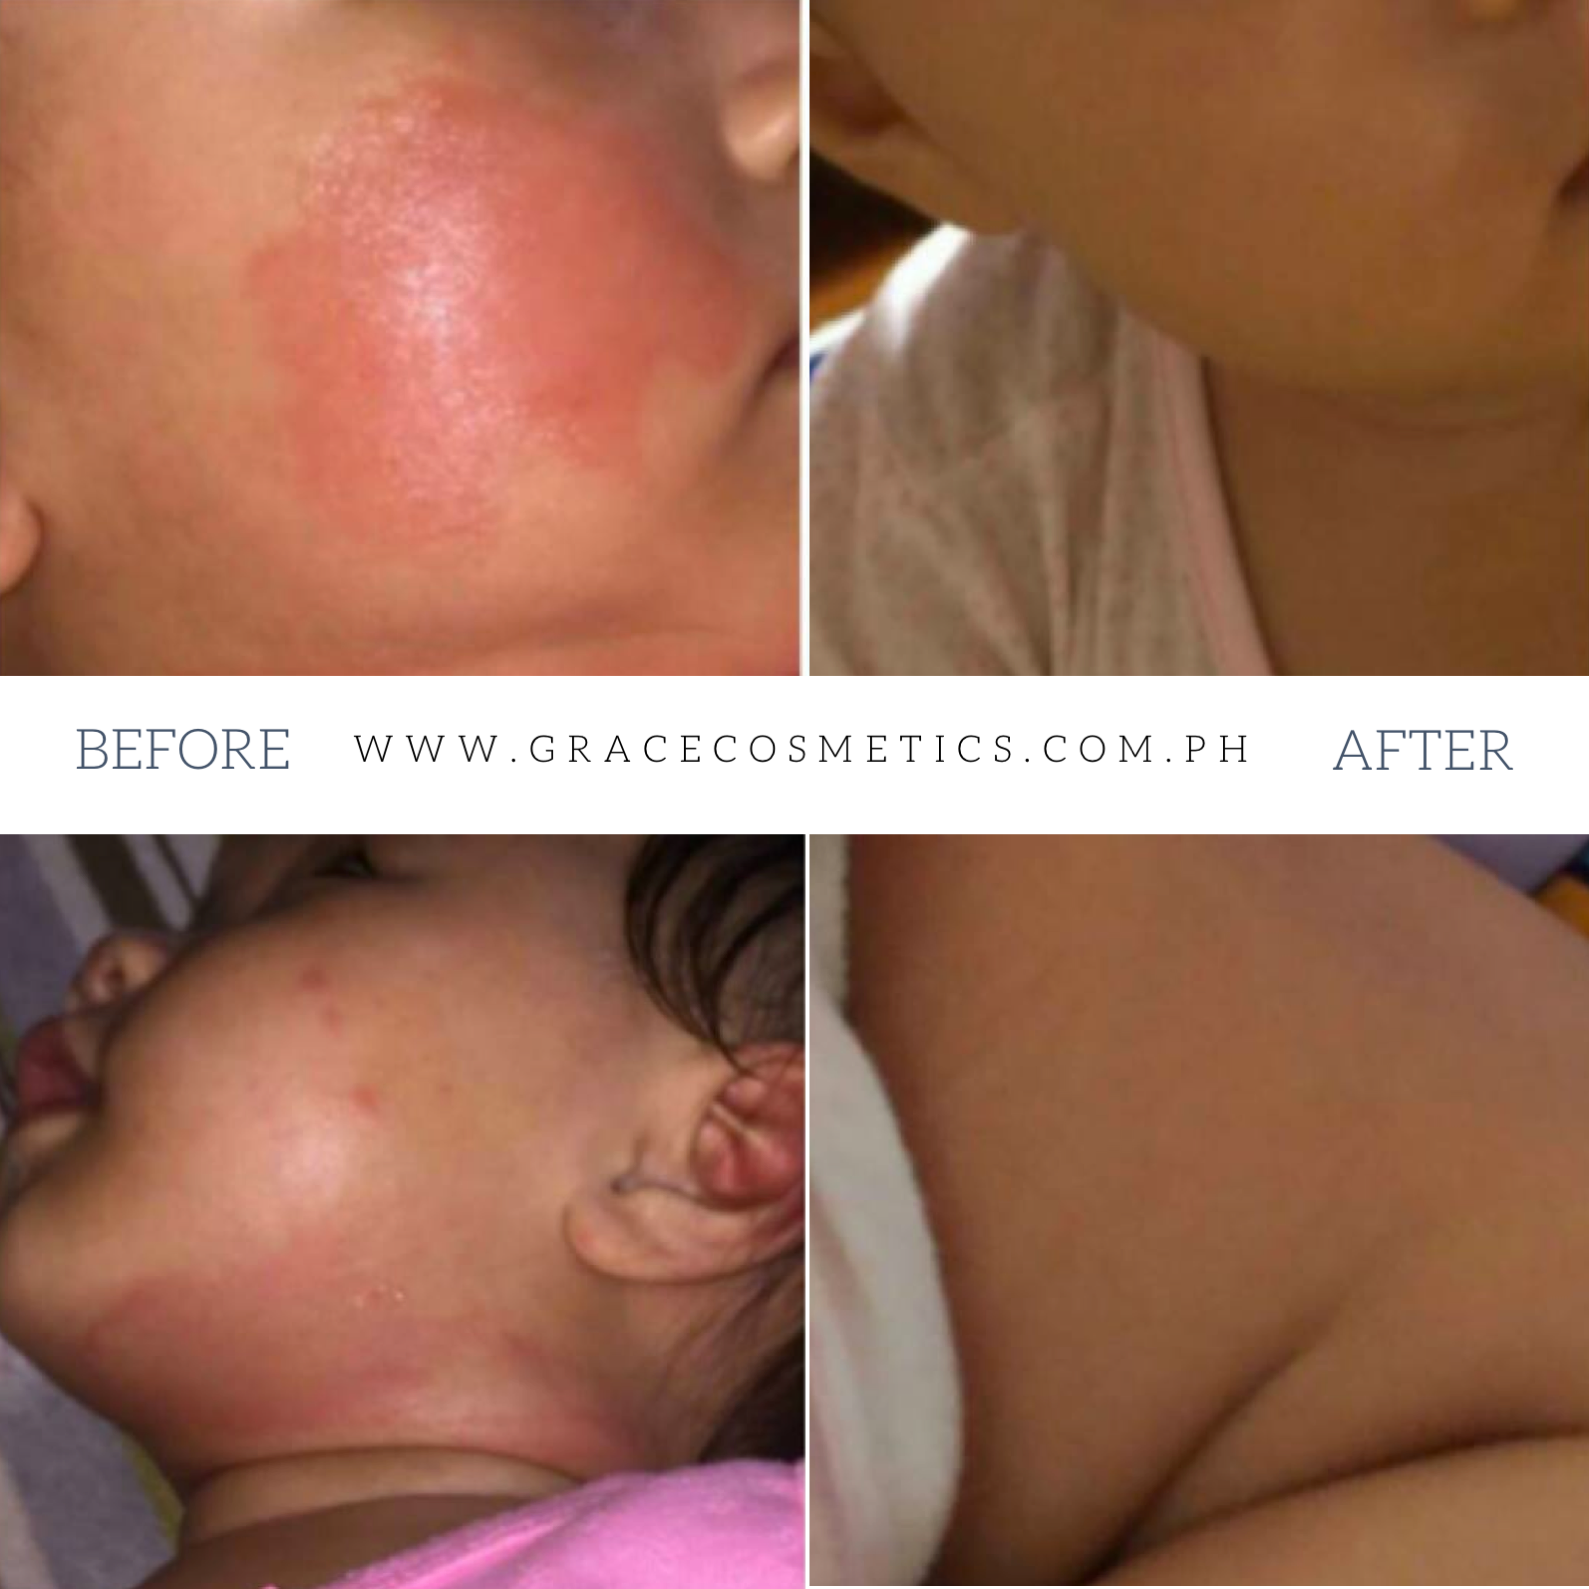 Infant rash and irritation gone in 1 day with the Aloe Medicated Skin Cream